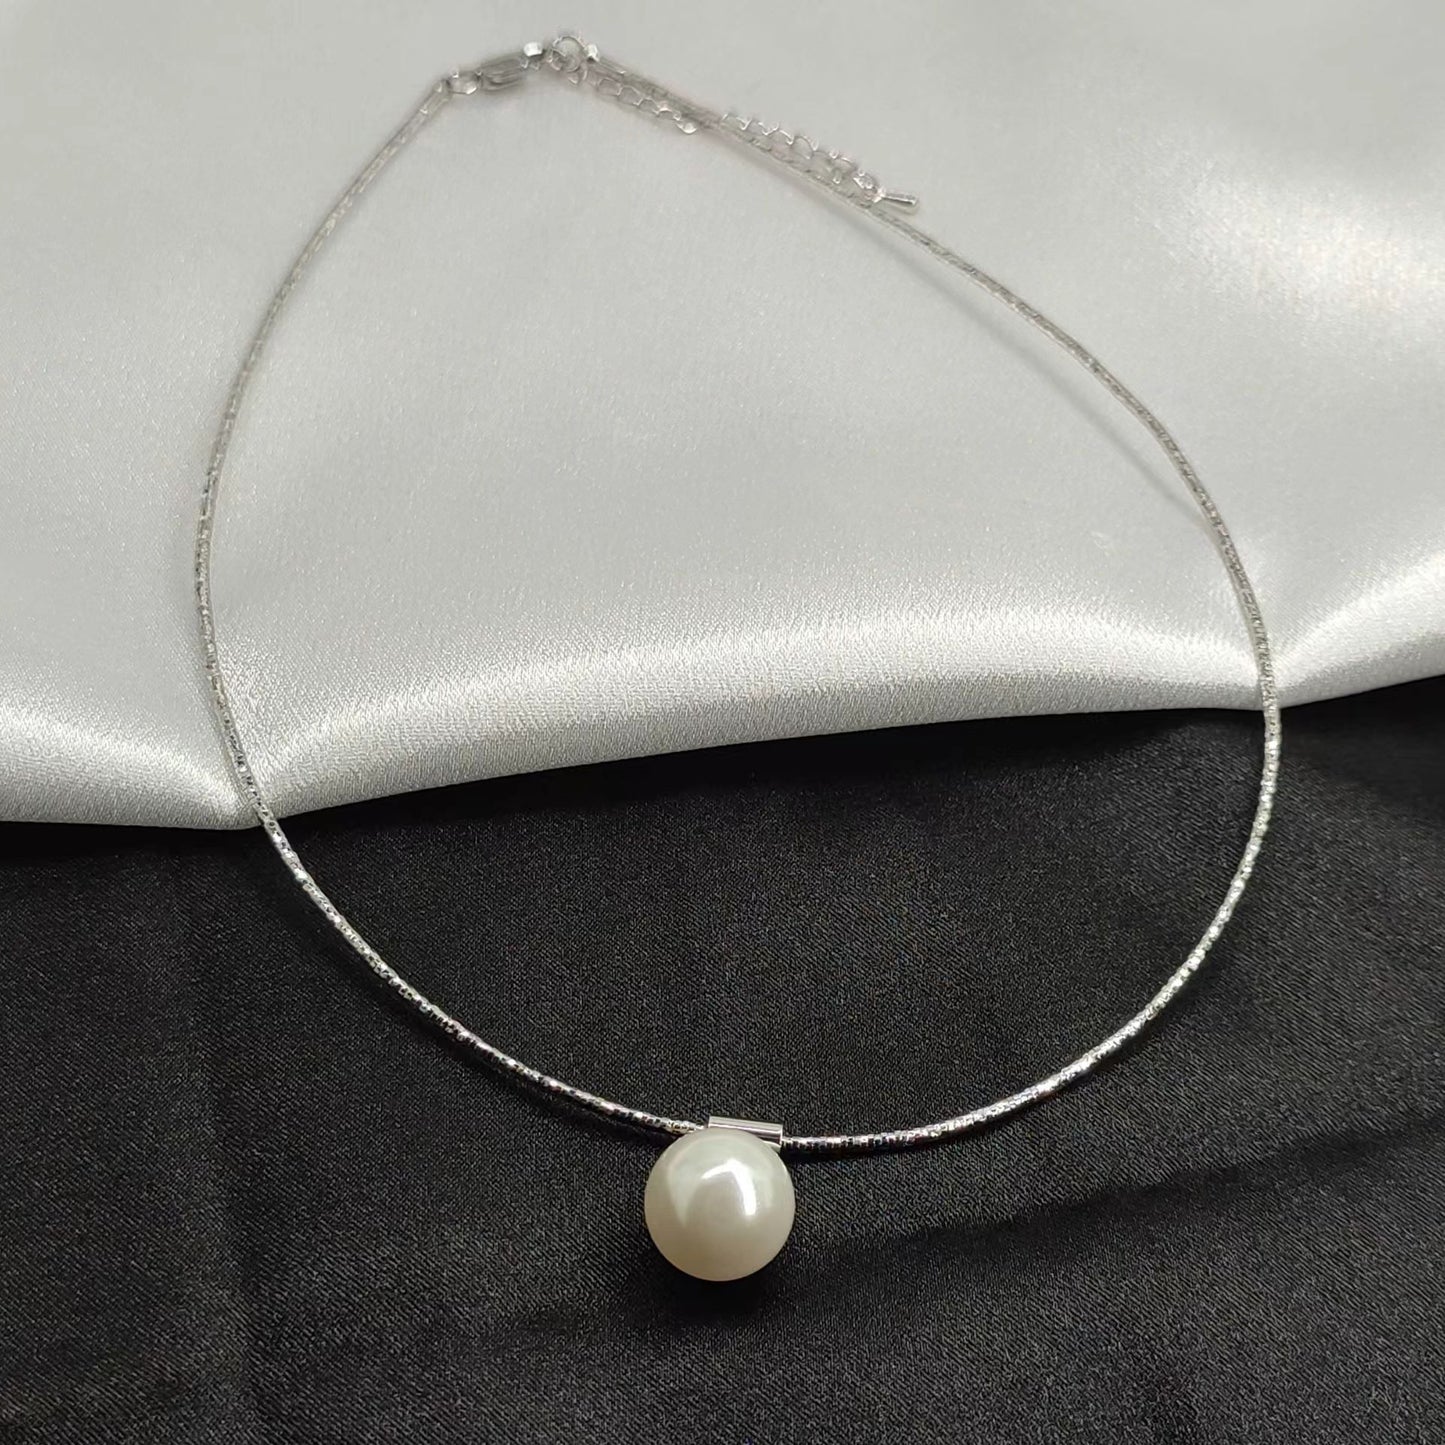 A25 Princess mermaid ( one large pearl) necklace